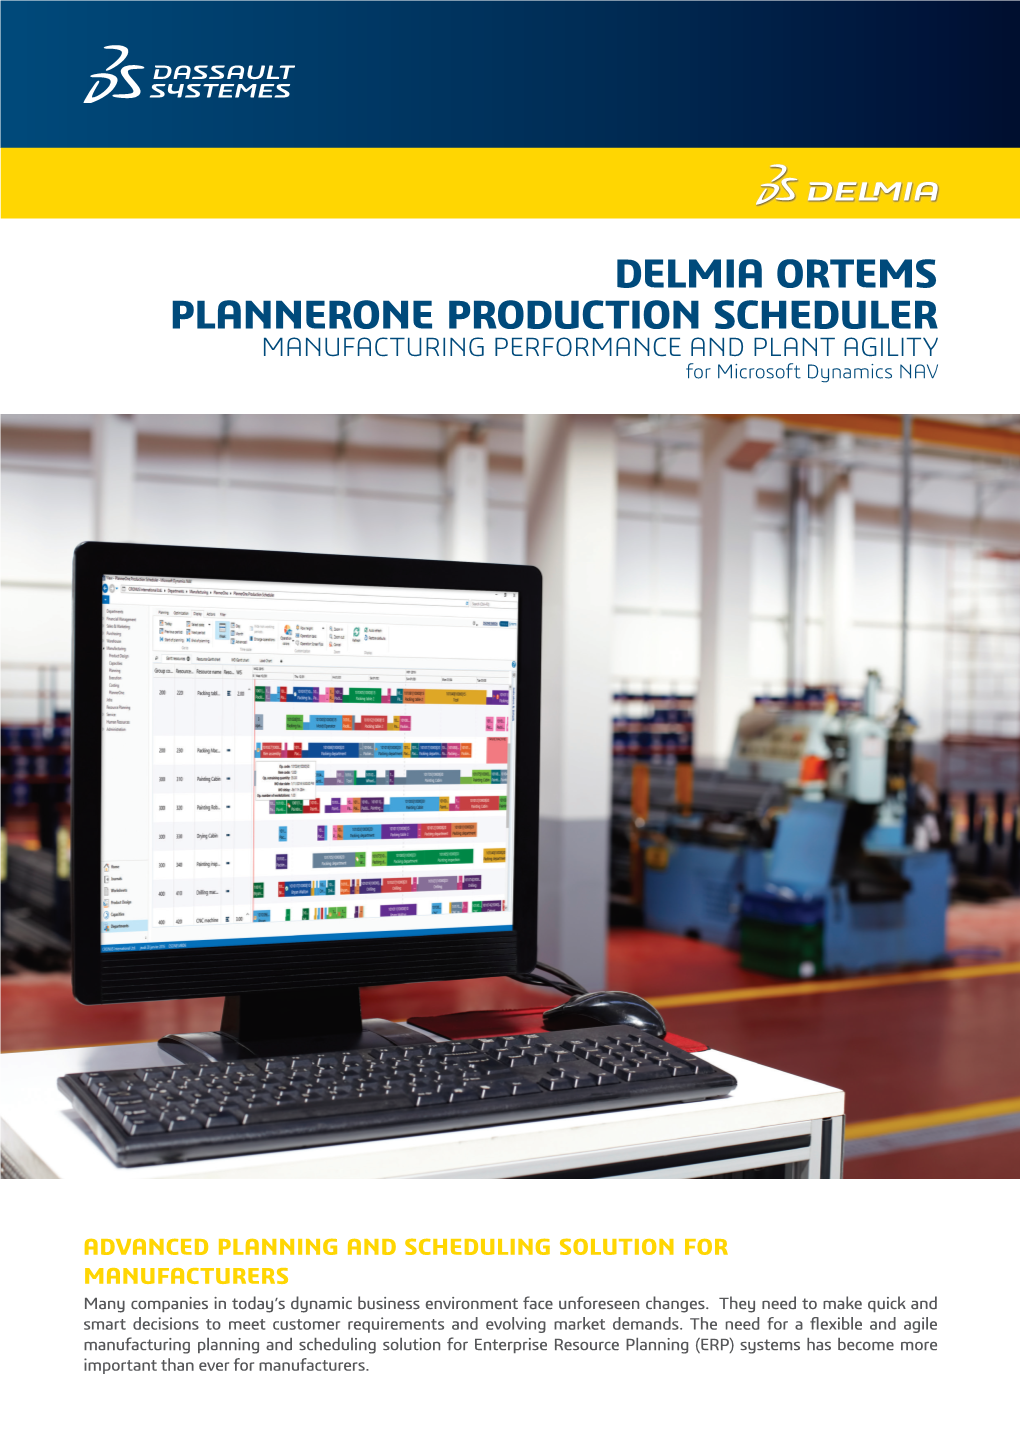 DELMIA ORTEMS PLANNERONE PRODUCTION SCHEDULER MANUFACTURING PERFORMANCE and PLANT AGILITY for Microsoft Dynamics NAV